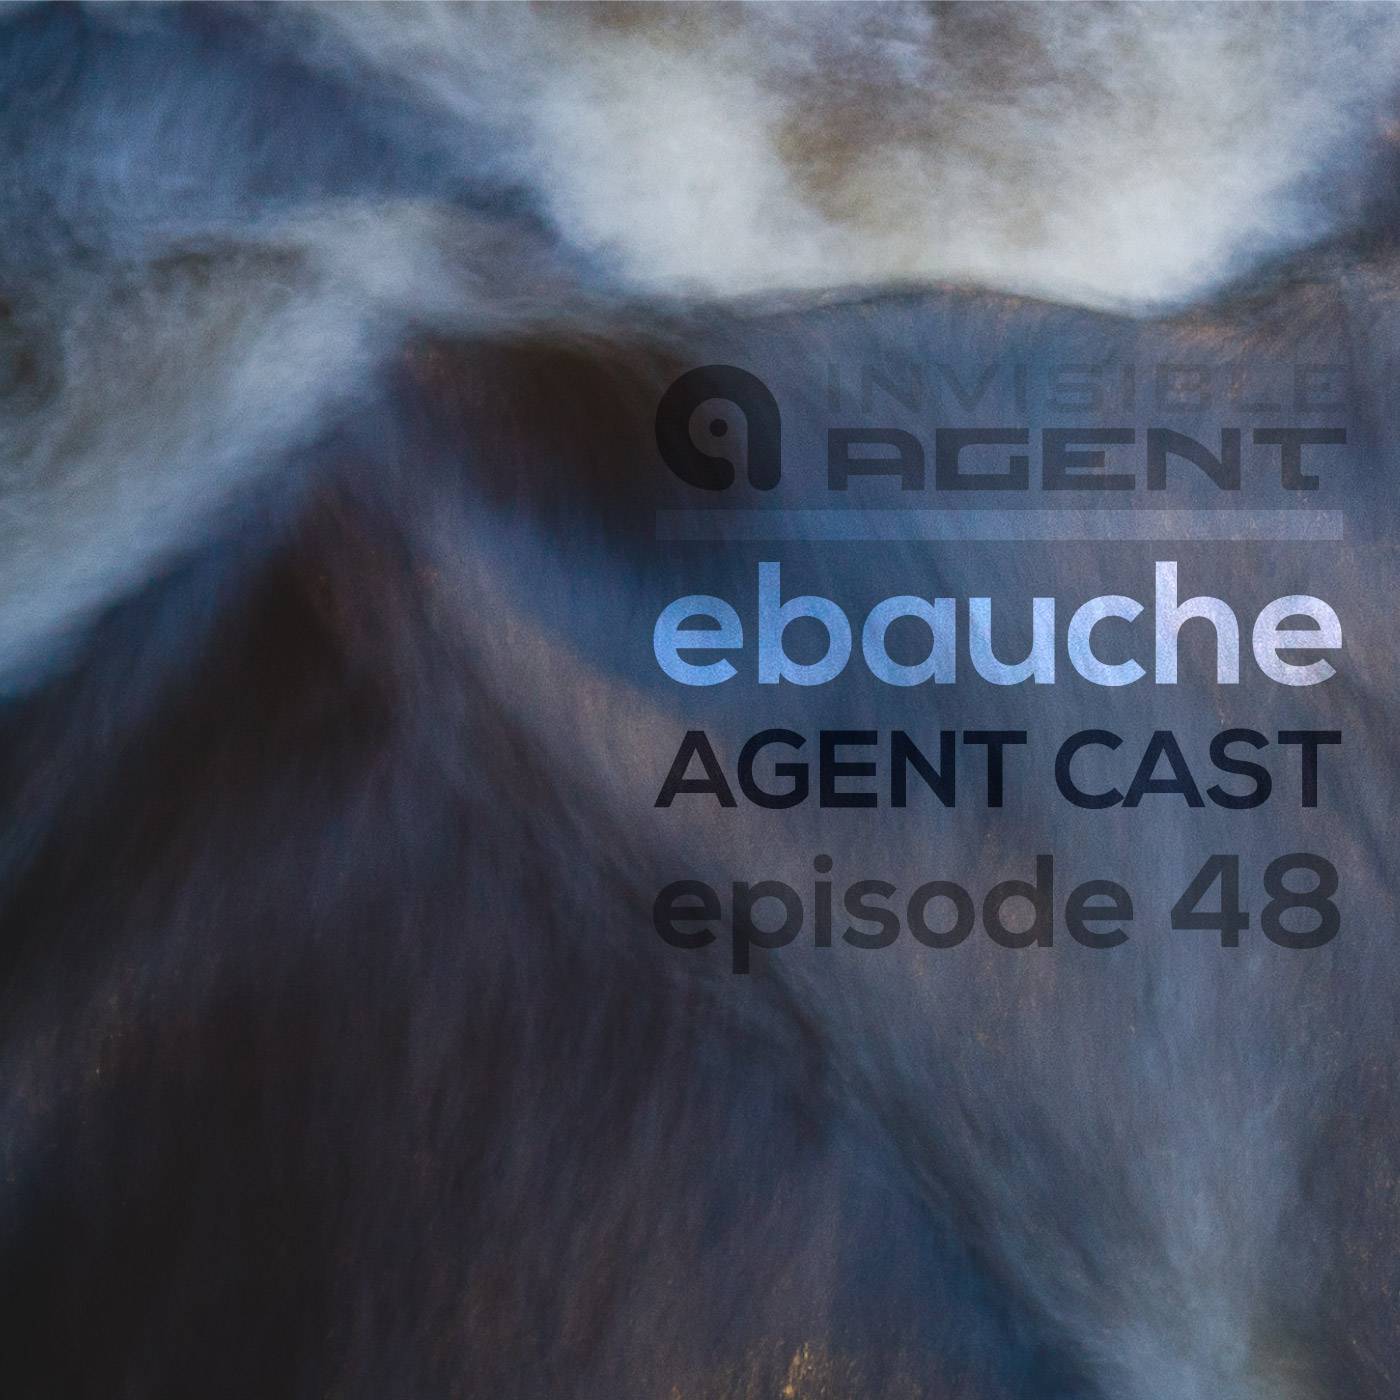 Alex Leonard a.k.a Ebauche is back with another fantastic mix recorded at Swagger.